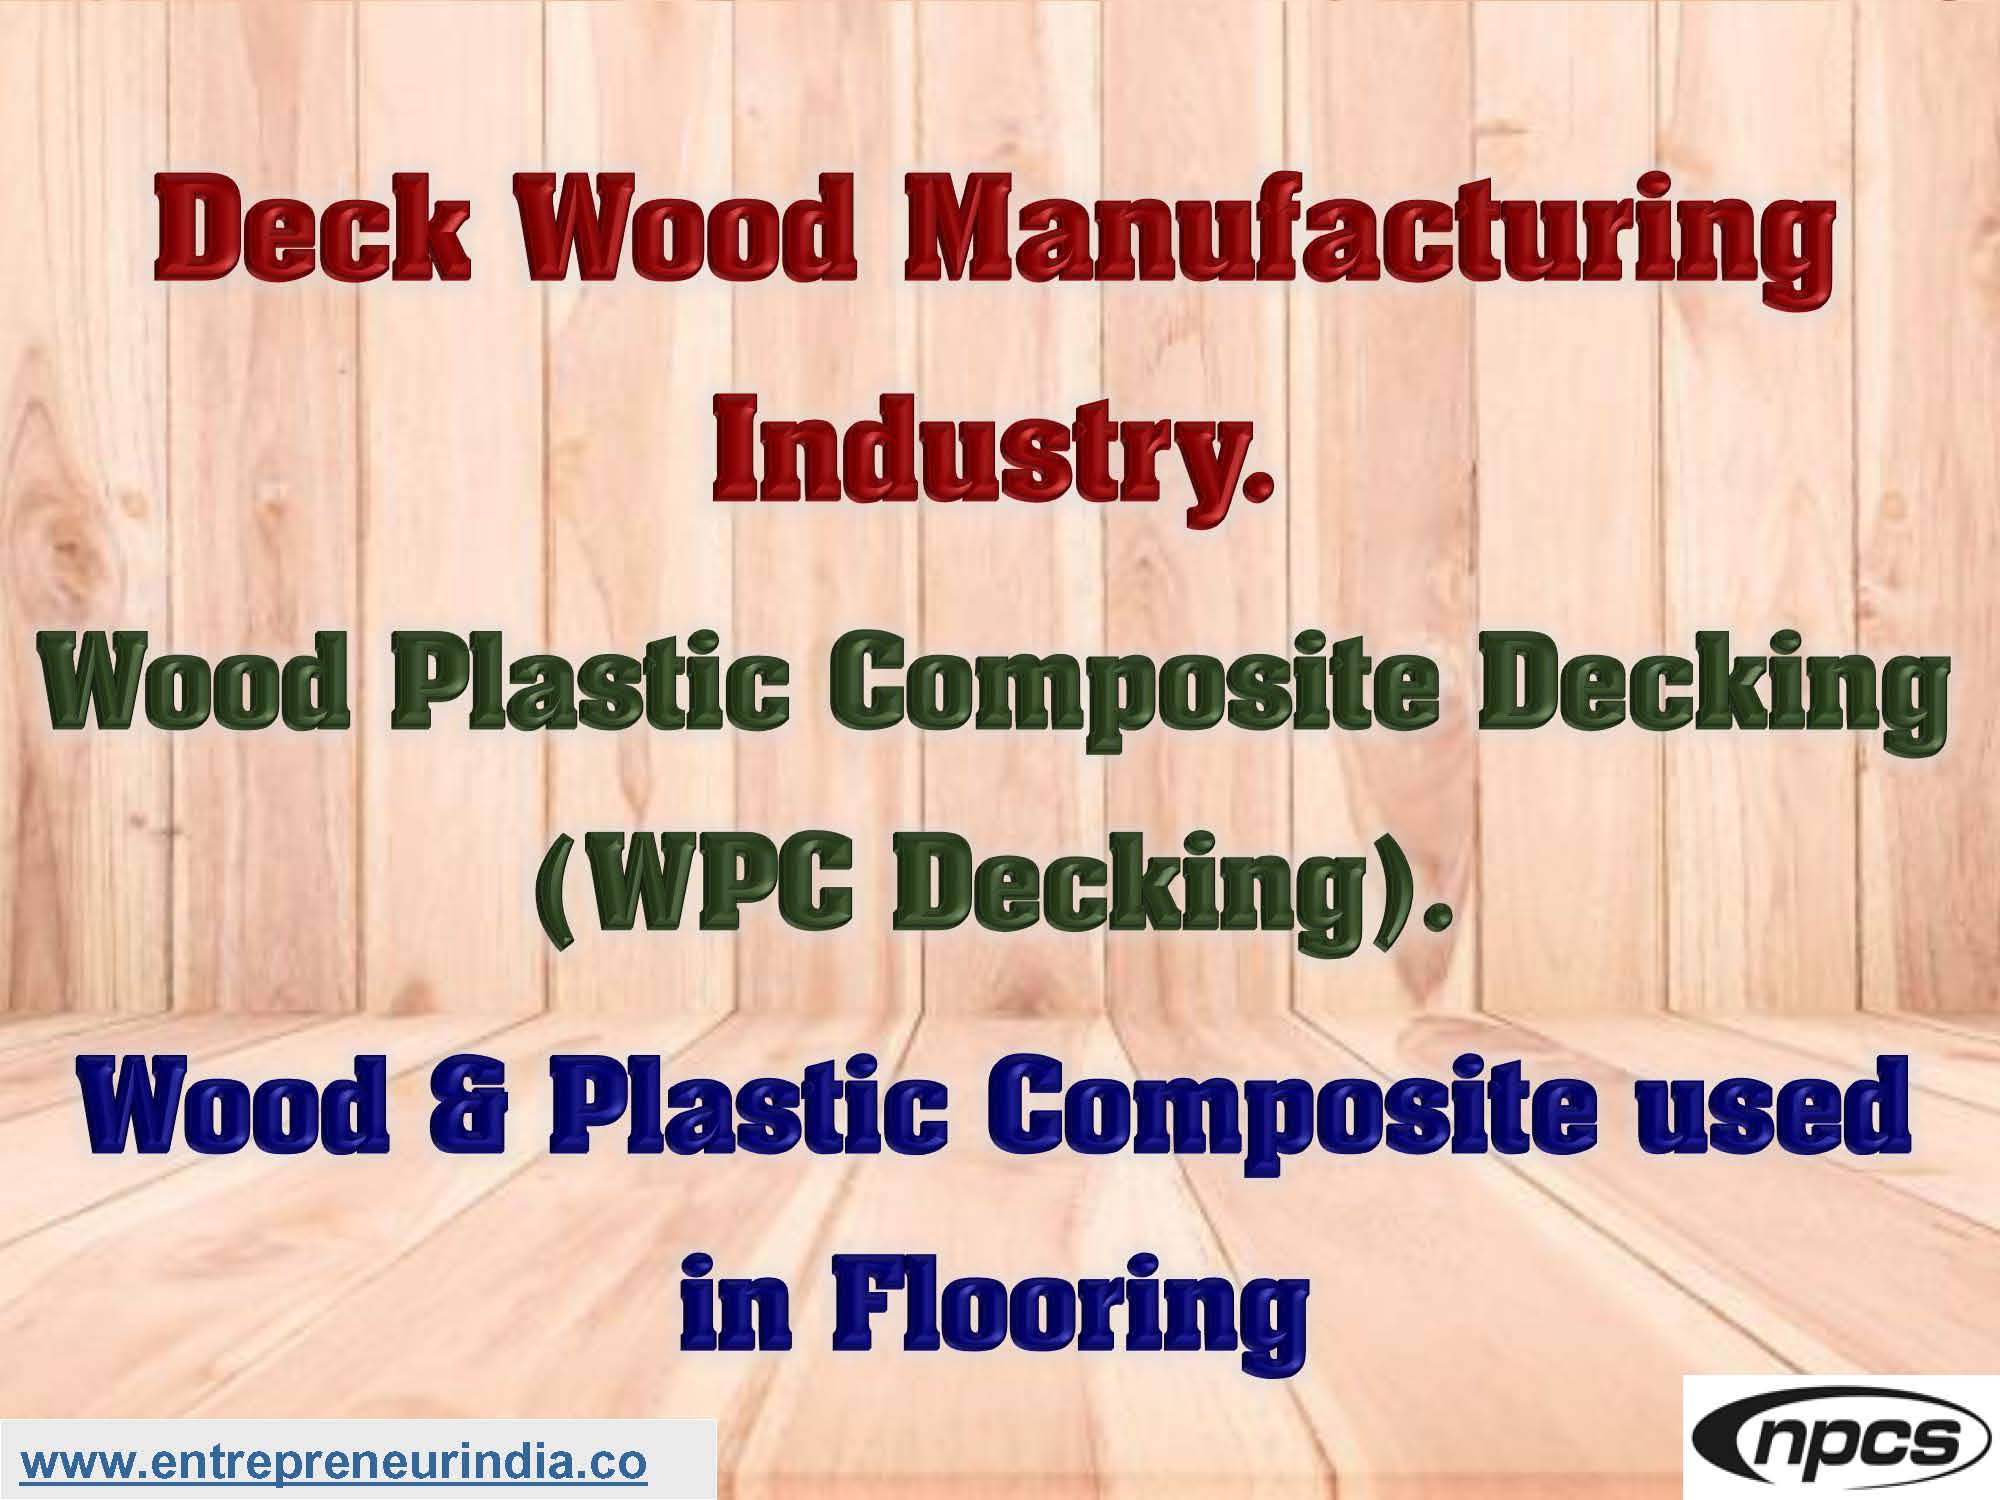 Deck Wood Manufacturing Industry